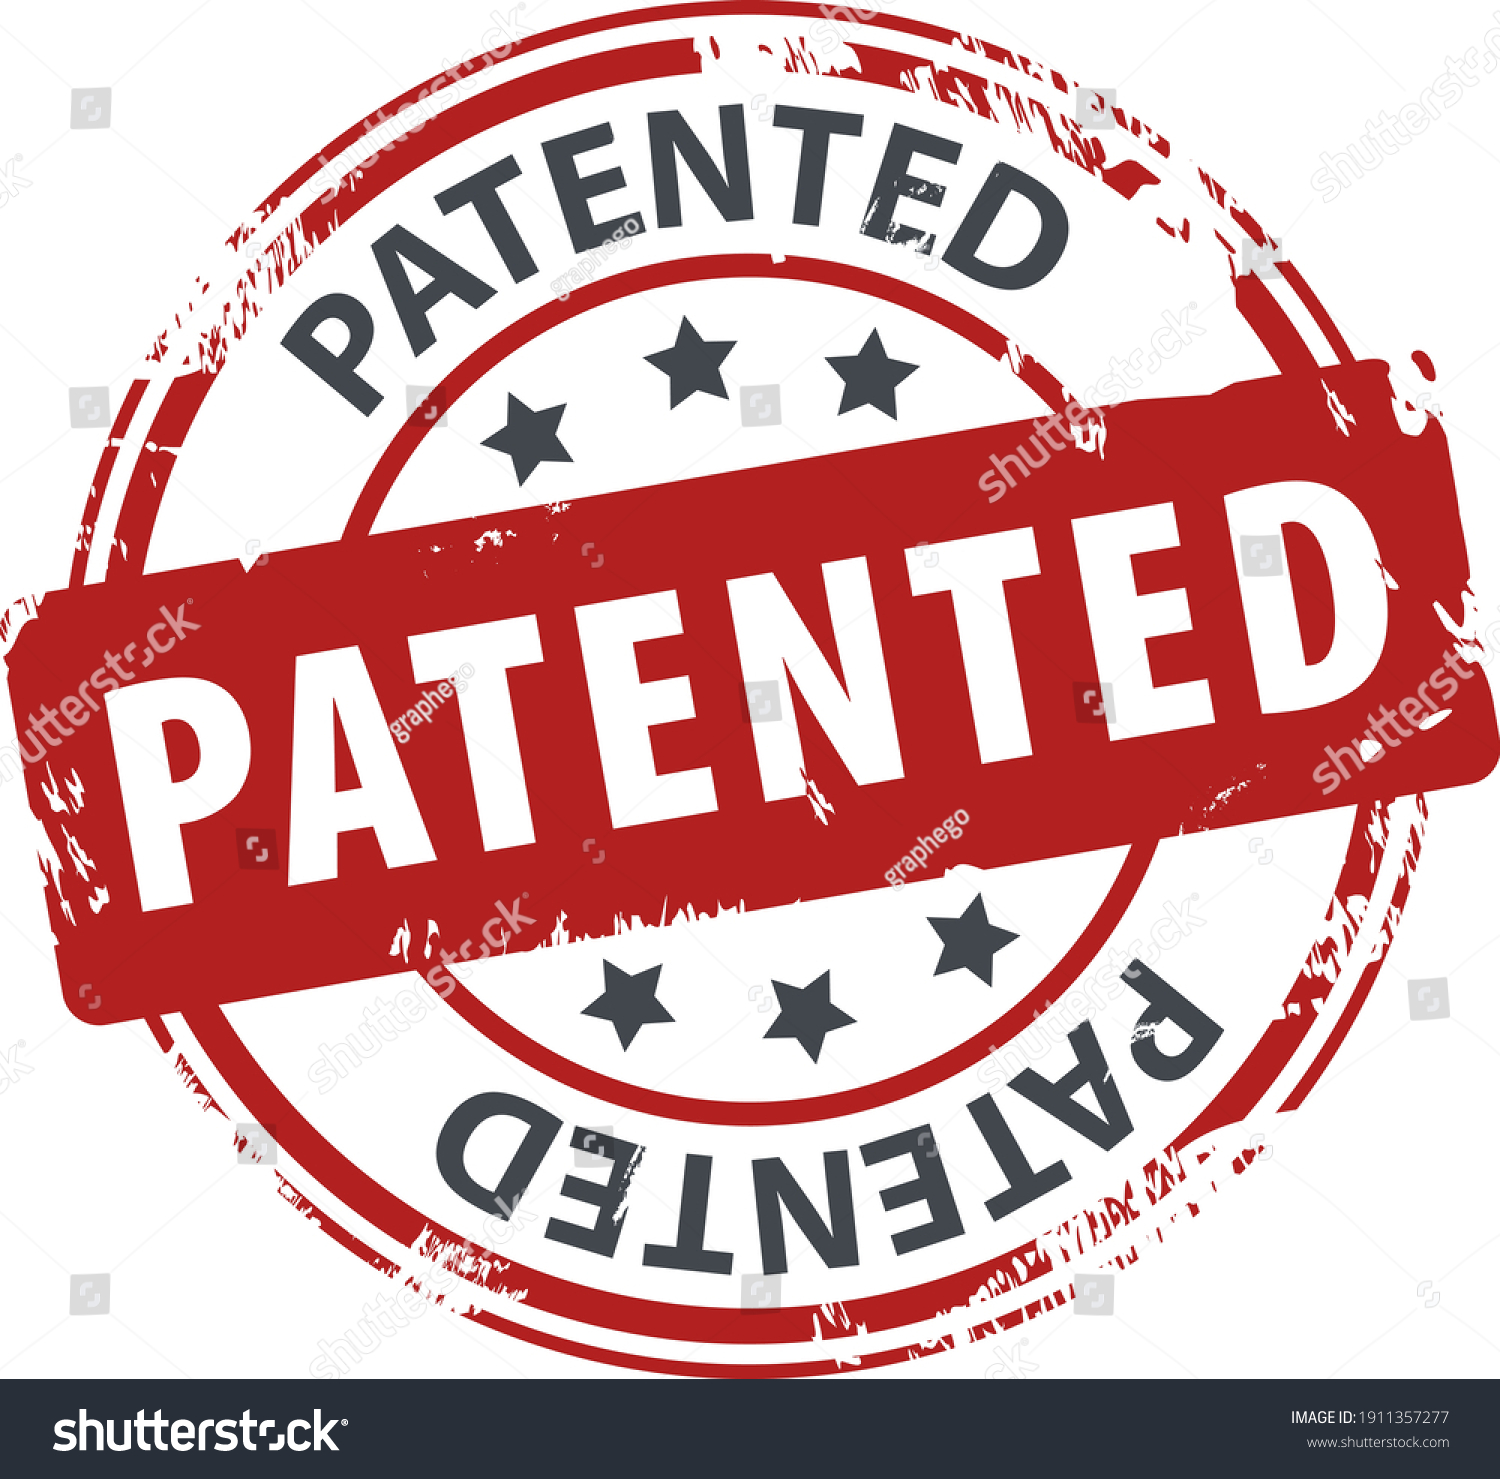 Patented Text On Round Rubber Stamp Vector Có Sẵn Miễn Phí Bản Quyền 1911357277 Shutterstock 7944